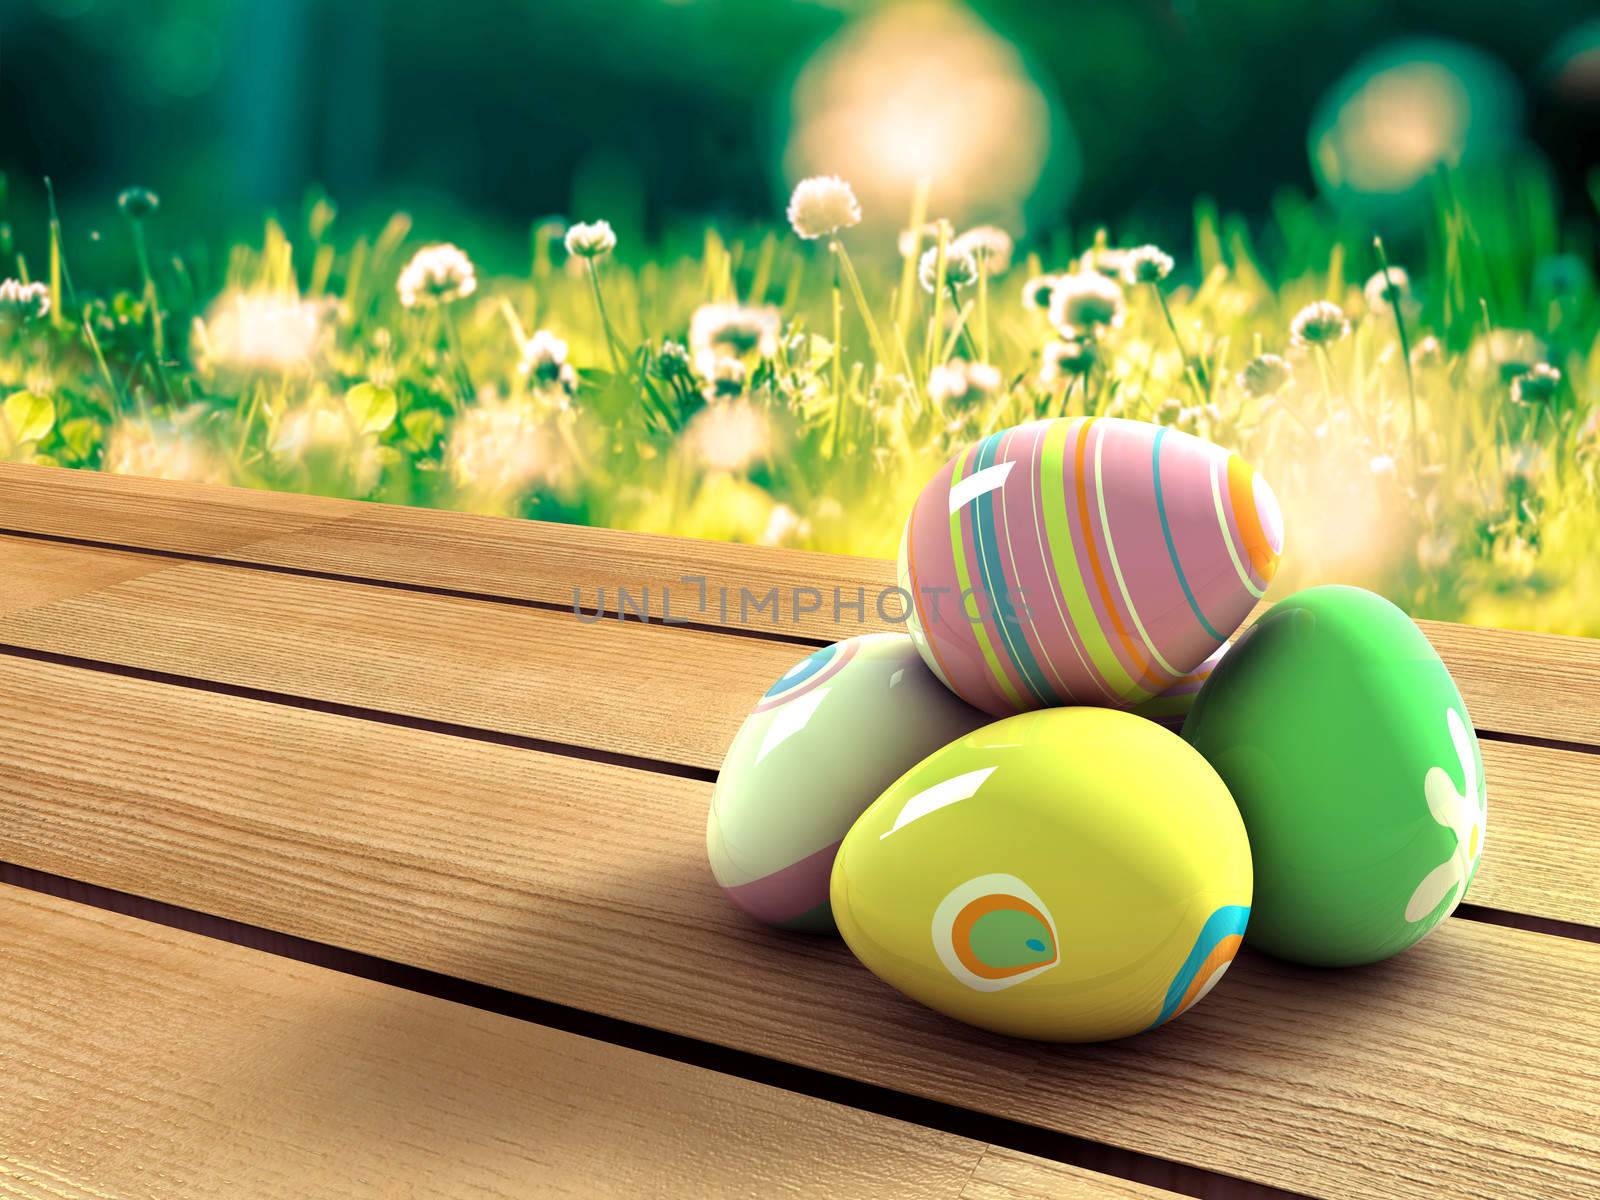 Easter eggs by dynamicfoto